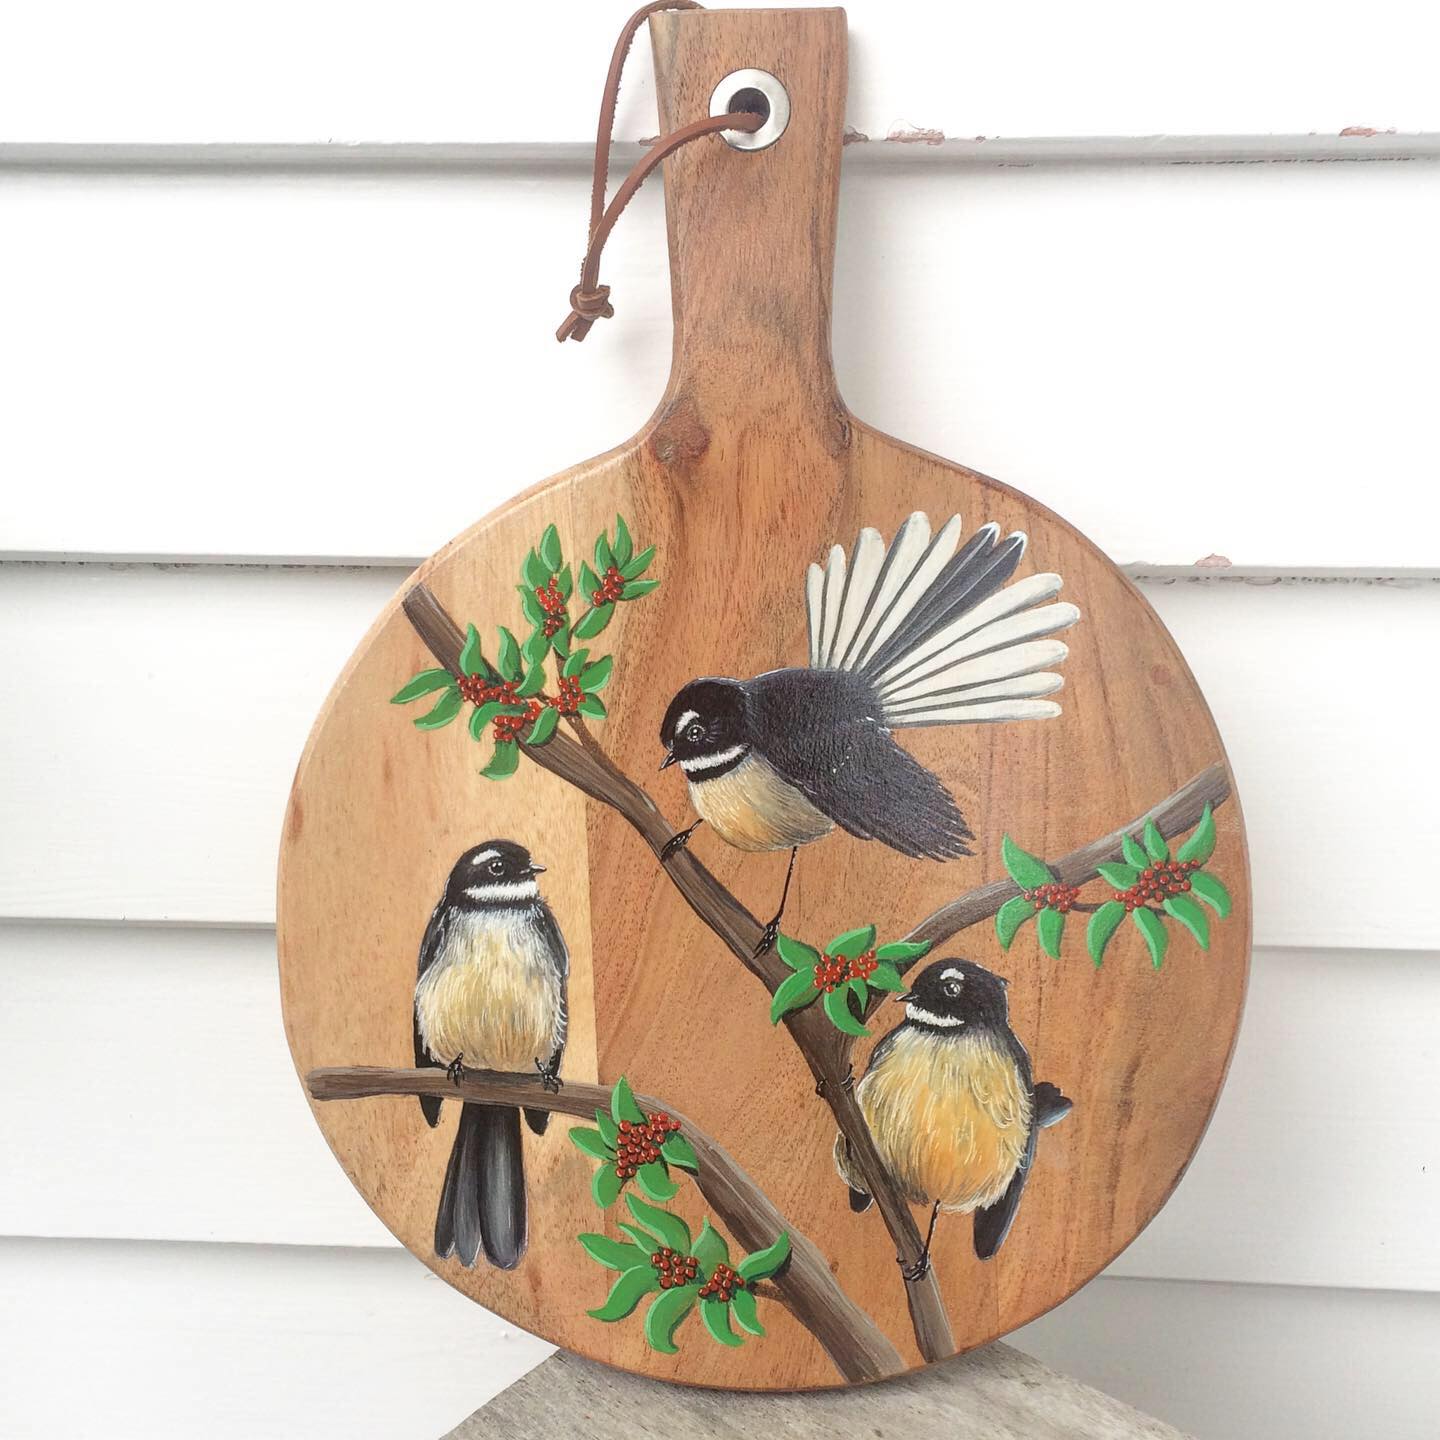 Fantails - Acrylic on wooden board